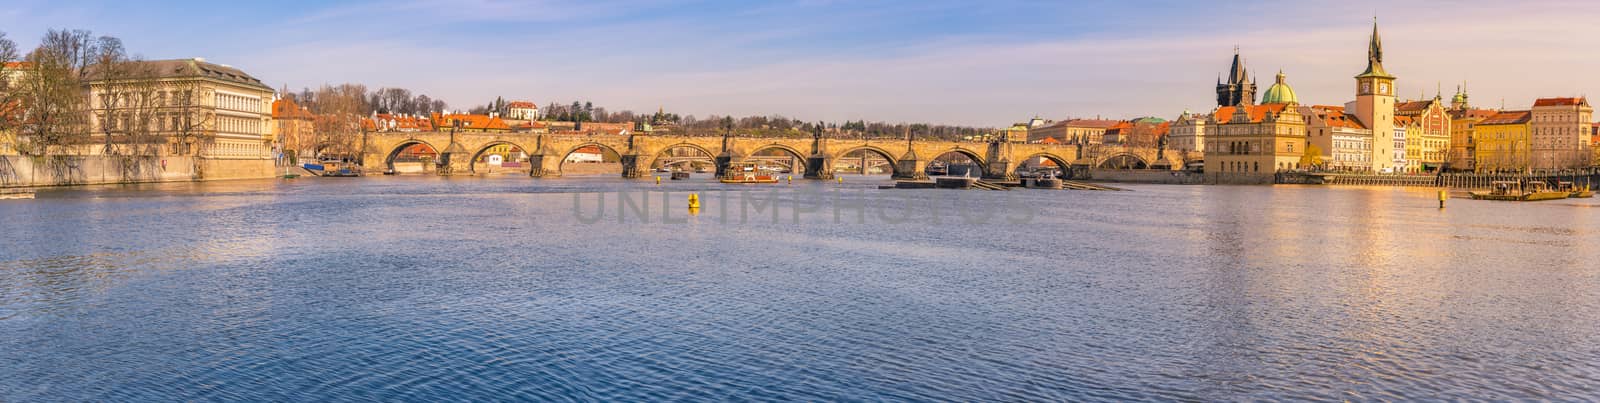 Cityscape with the Charles Bridge, the Vltava river and the historical buildings from Prague, the capital of Czech Republic, on a sunny day of March.